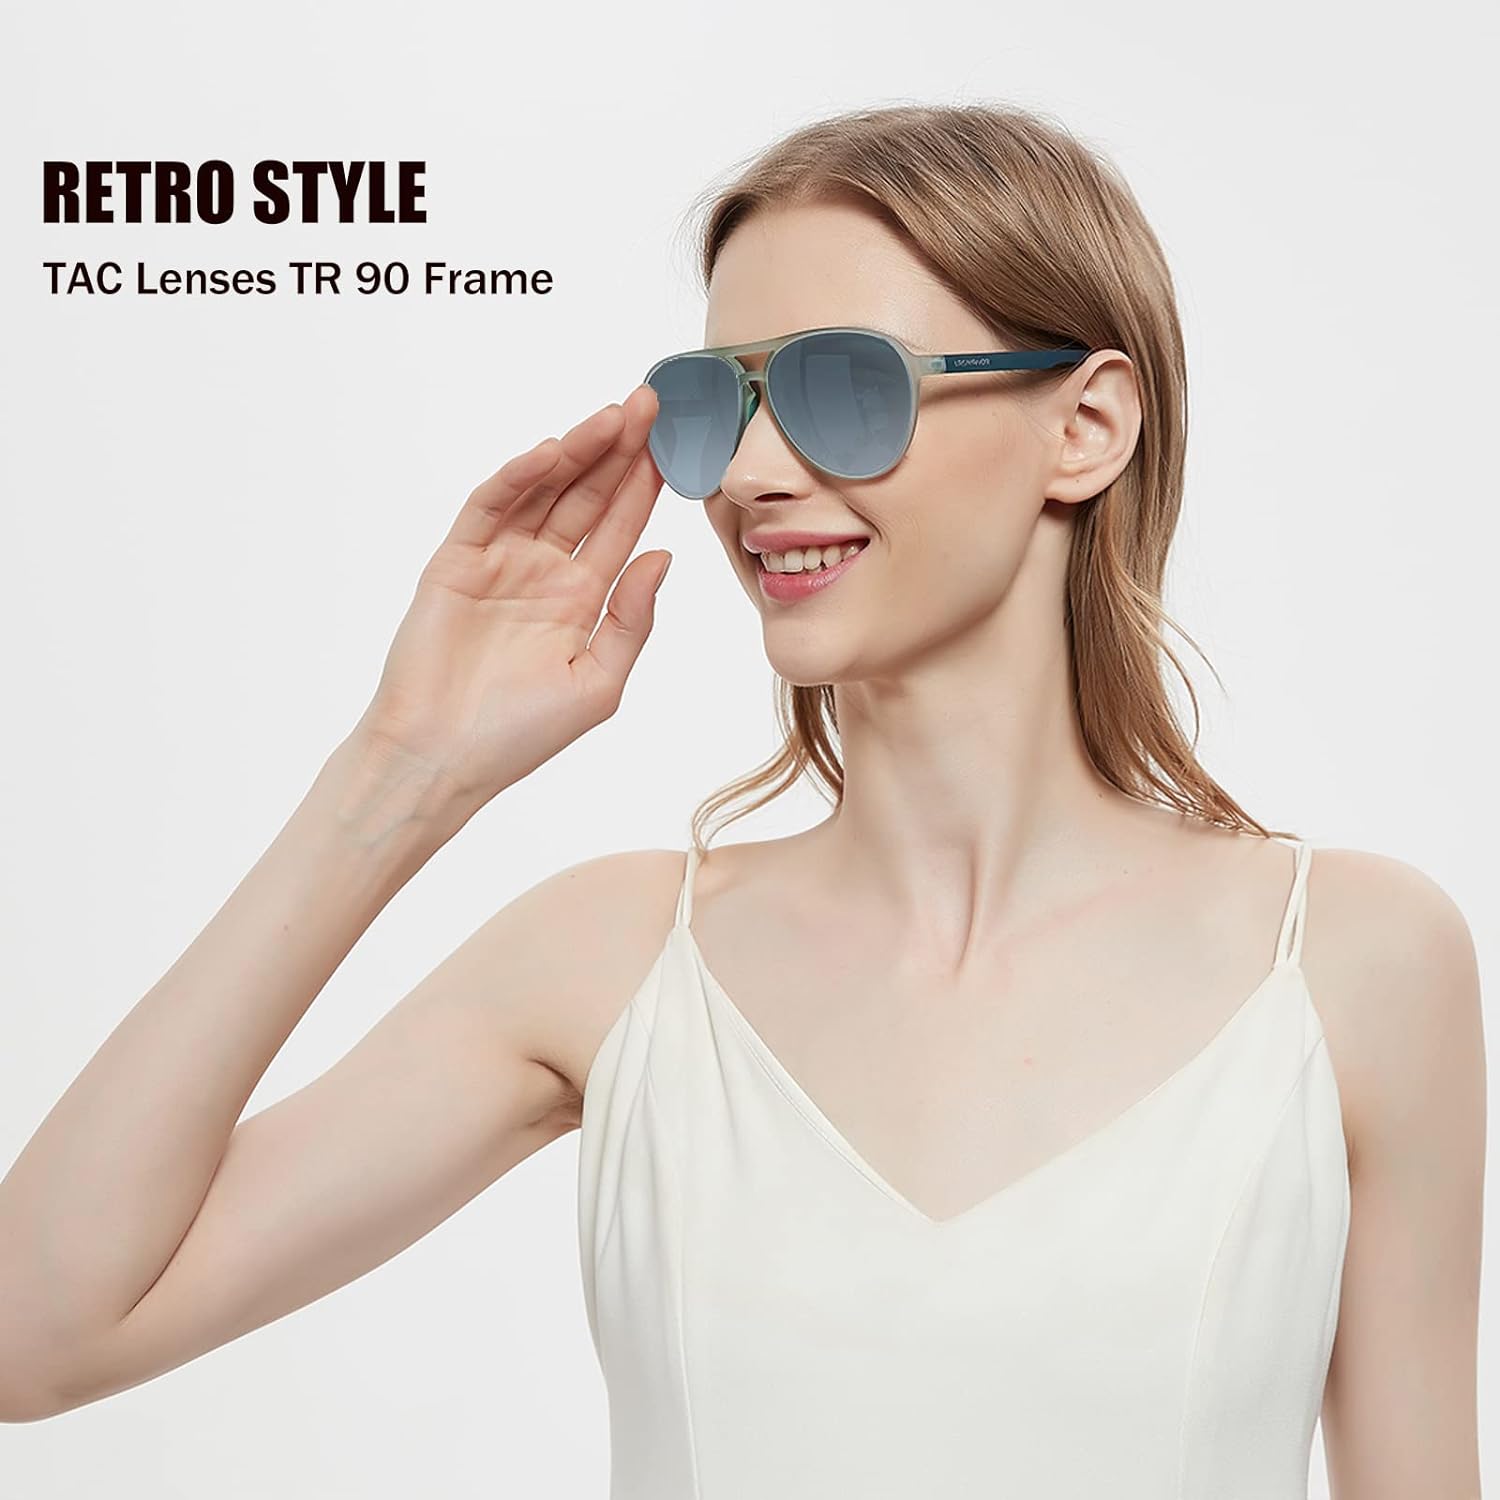 Lightweight TAC Polarized Tinted Classic Vintage Retro 70S Sunglasses, TR-90 Frame for Women Men, UV 400 Protection